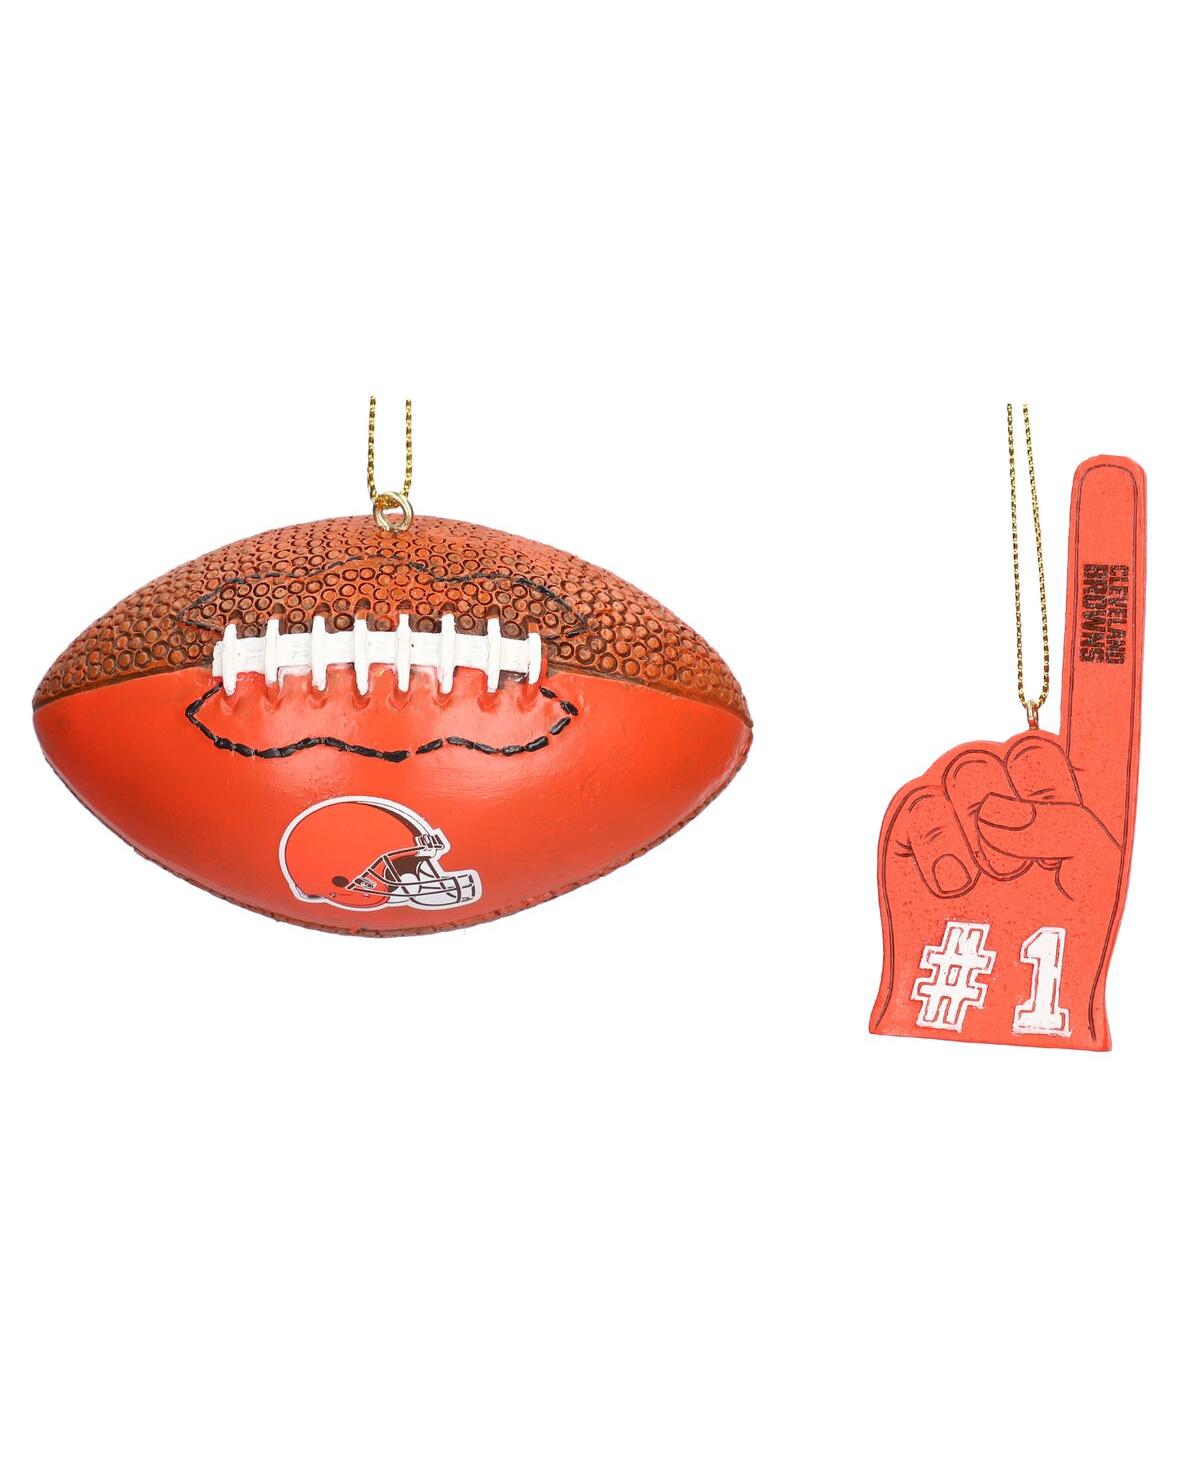 The Memory Company Cleveland Browns Football and Foam Finger Ornament Two-Pack - Multi